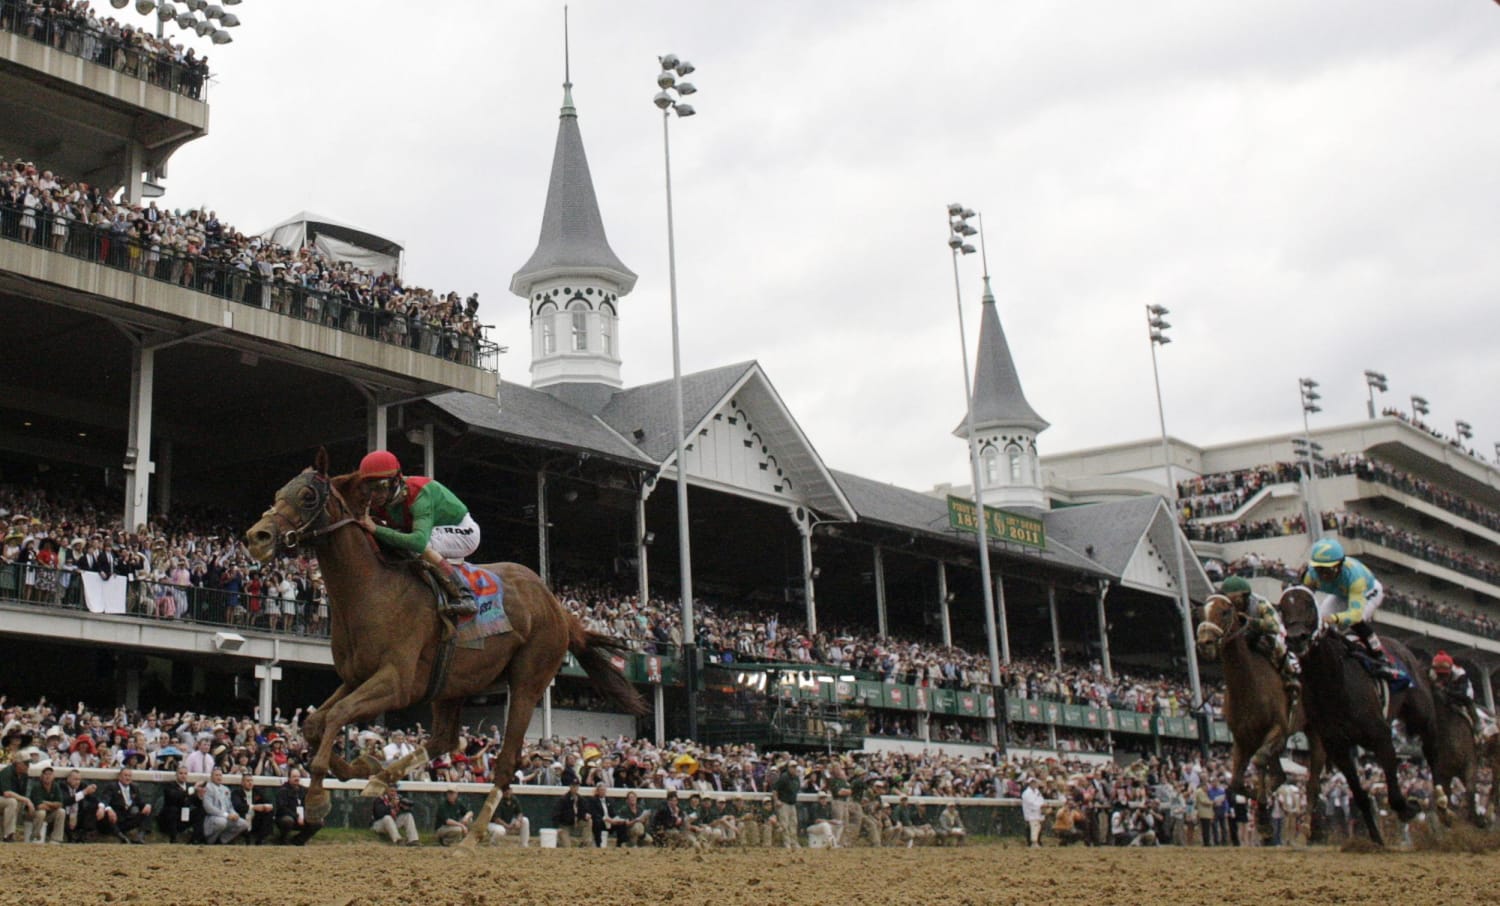 If you wanted to buy 125 mint juleps at Churchill Downs during the Ke    ntucky   Derby on May 3, it would run you $1,000. Or you could spend that for just one.